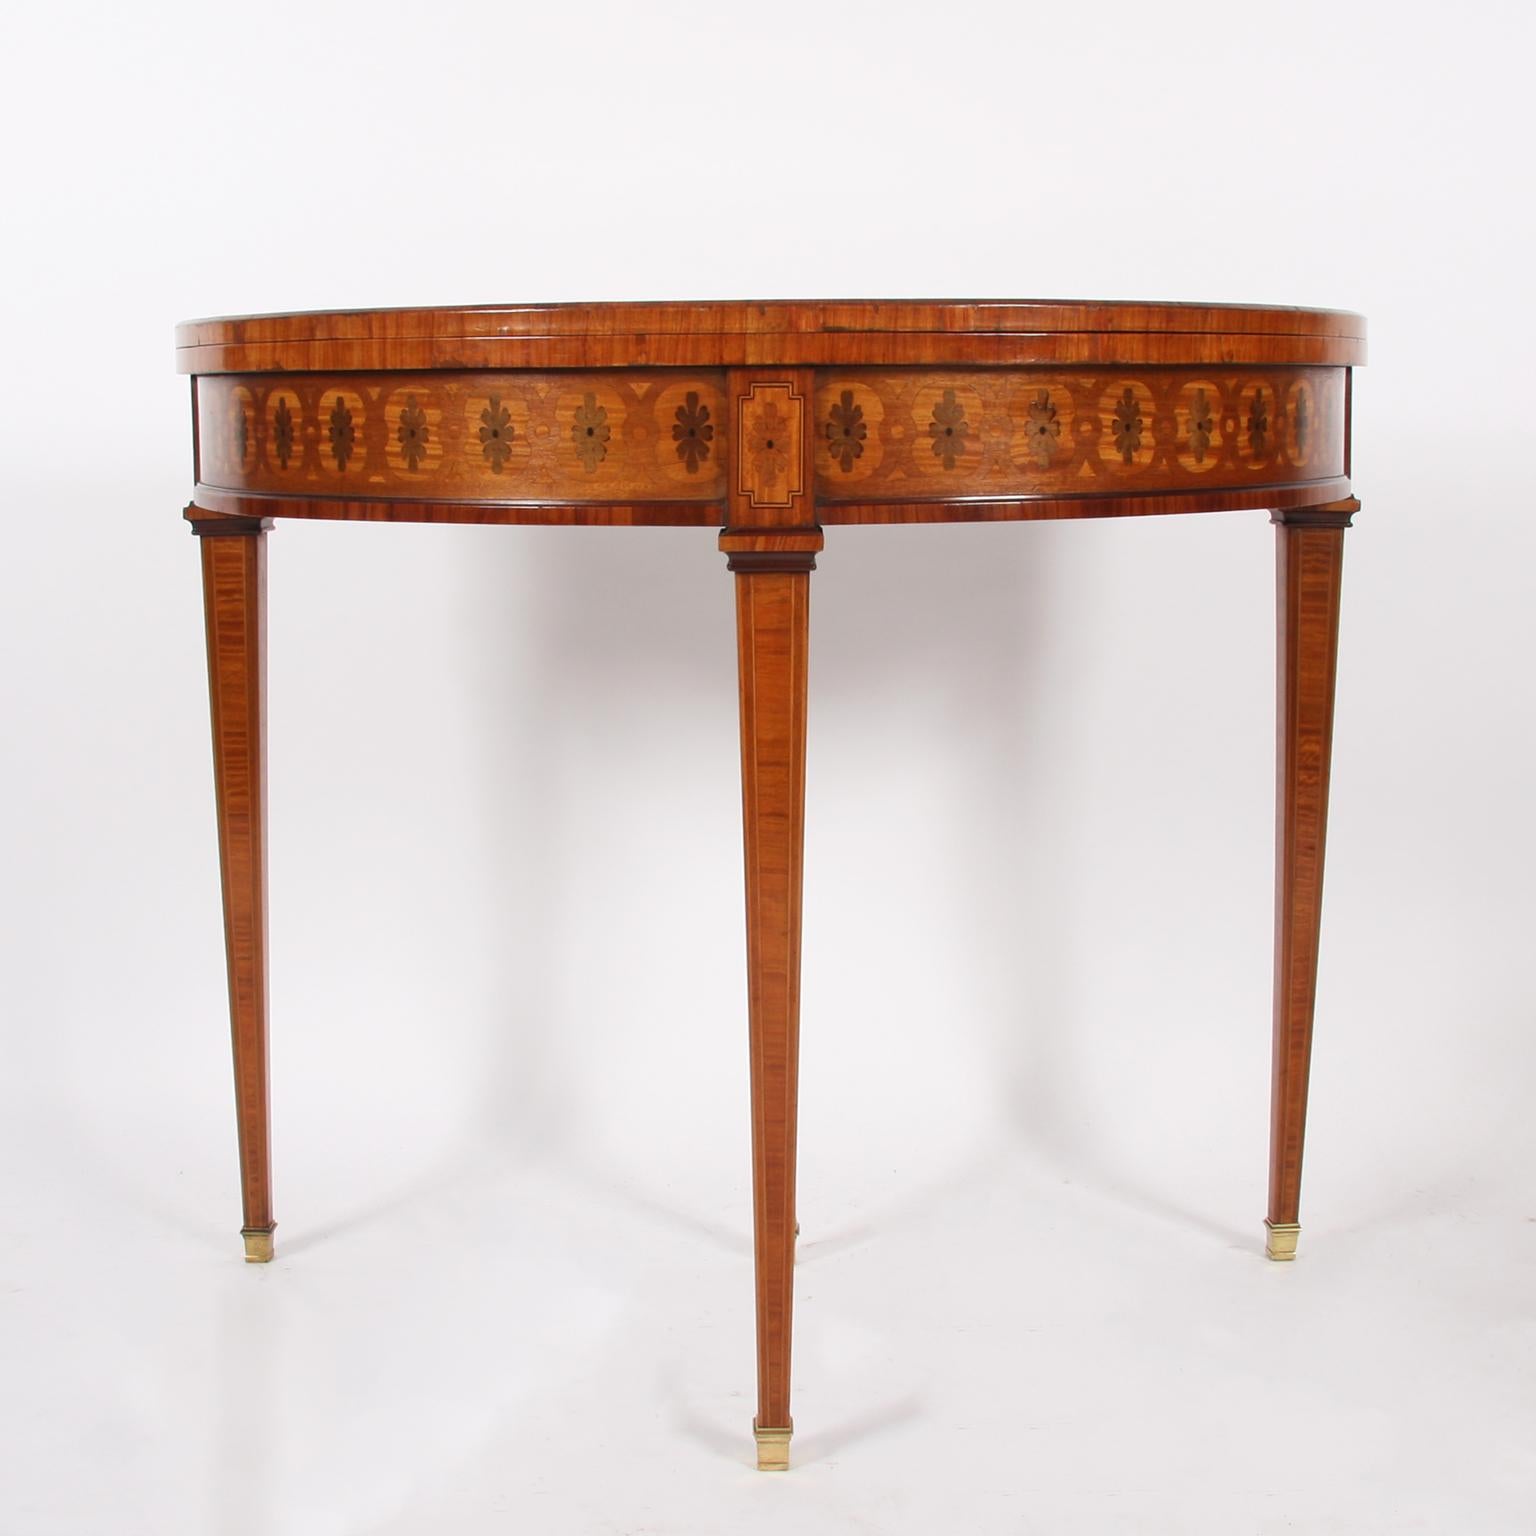 French, 19th century.

A superb demi lune card table, with beautiful parquetry. 

Very good condition. 

Wear consistent with age and use.